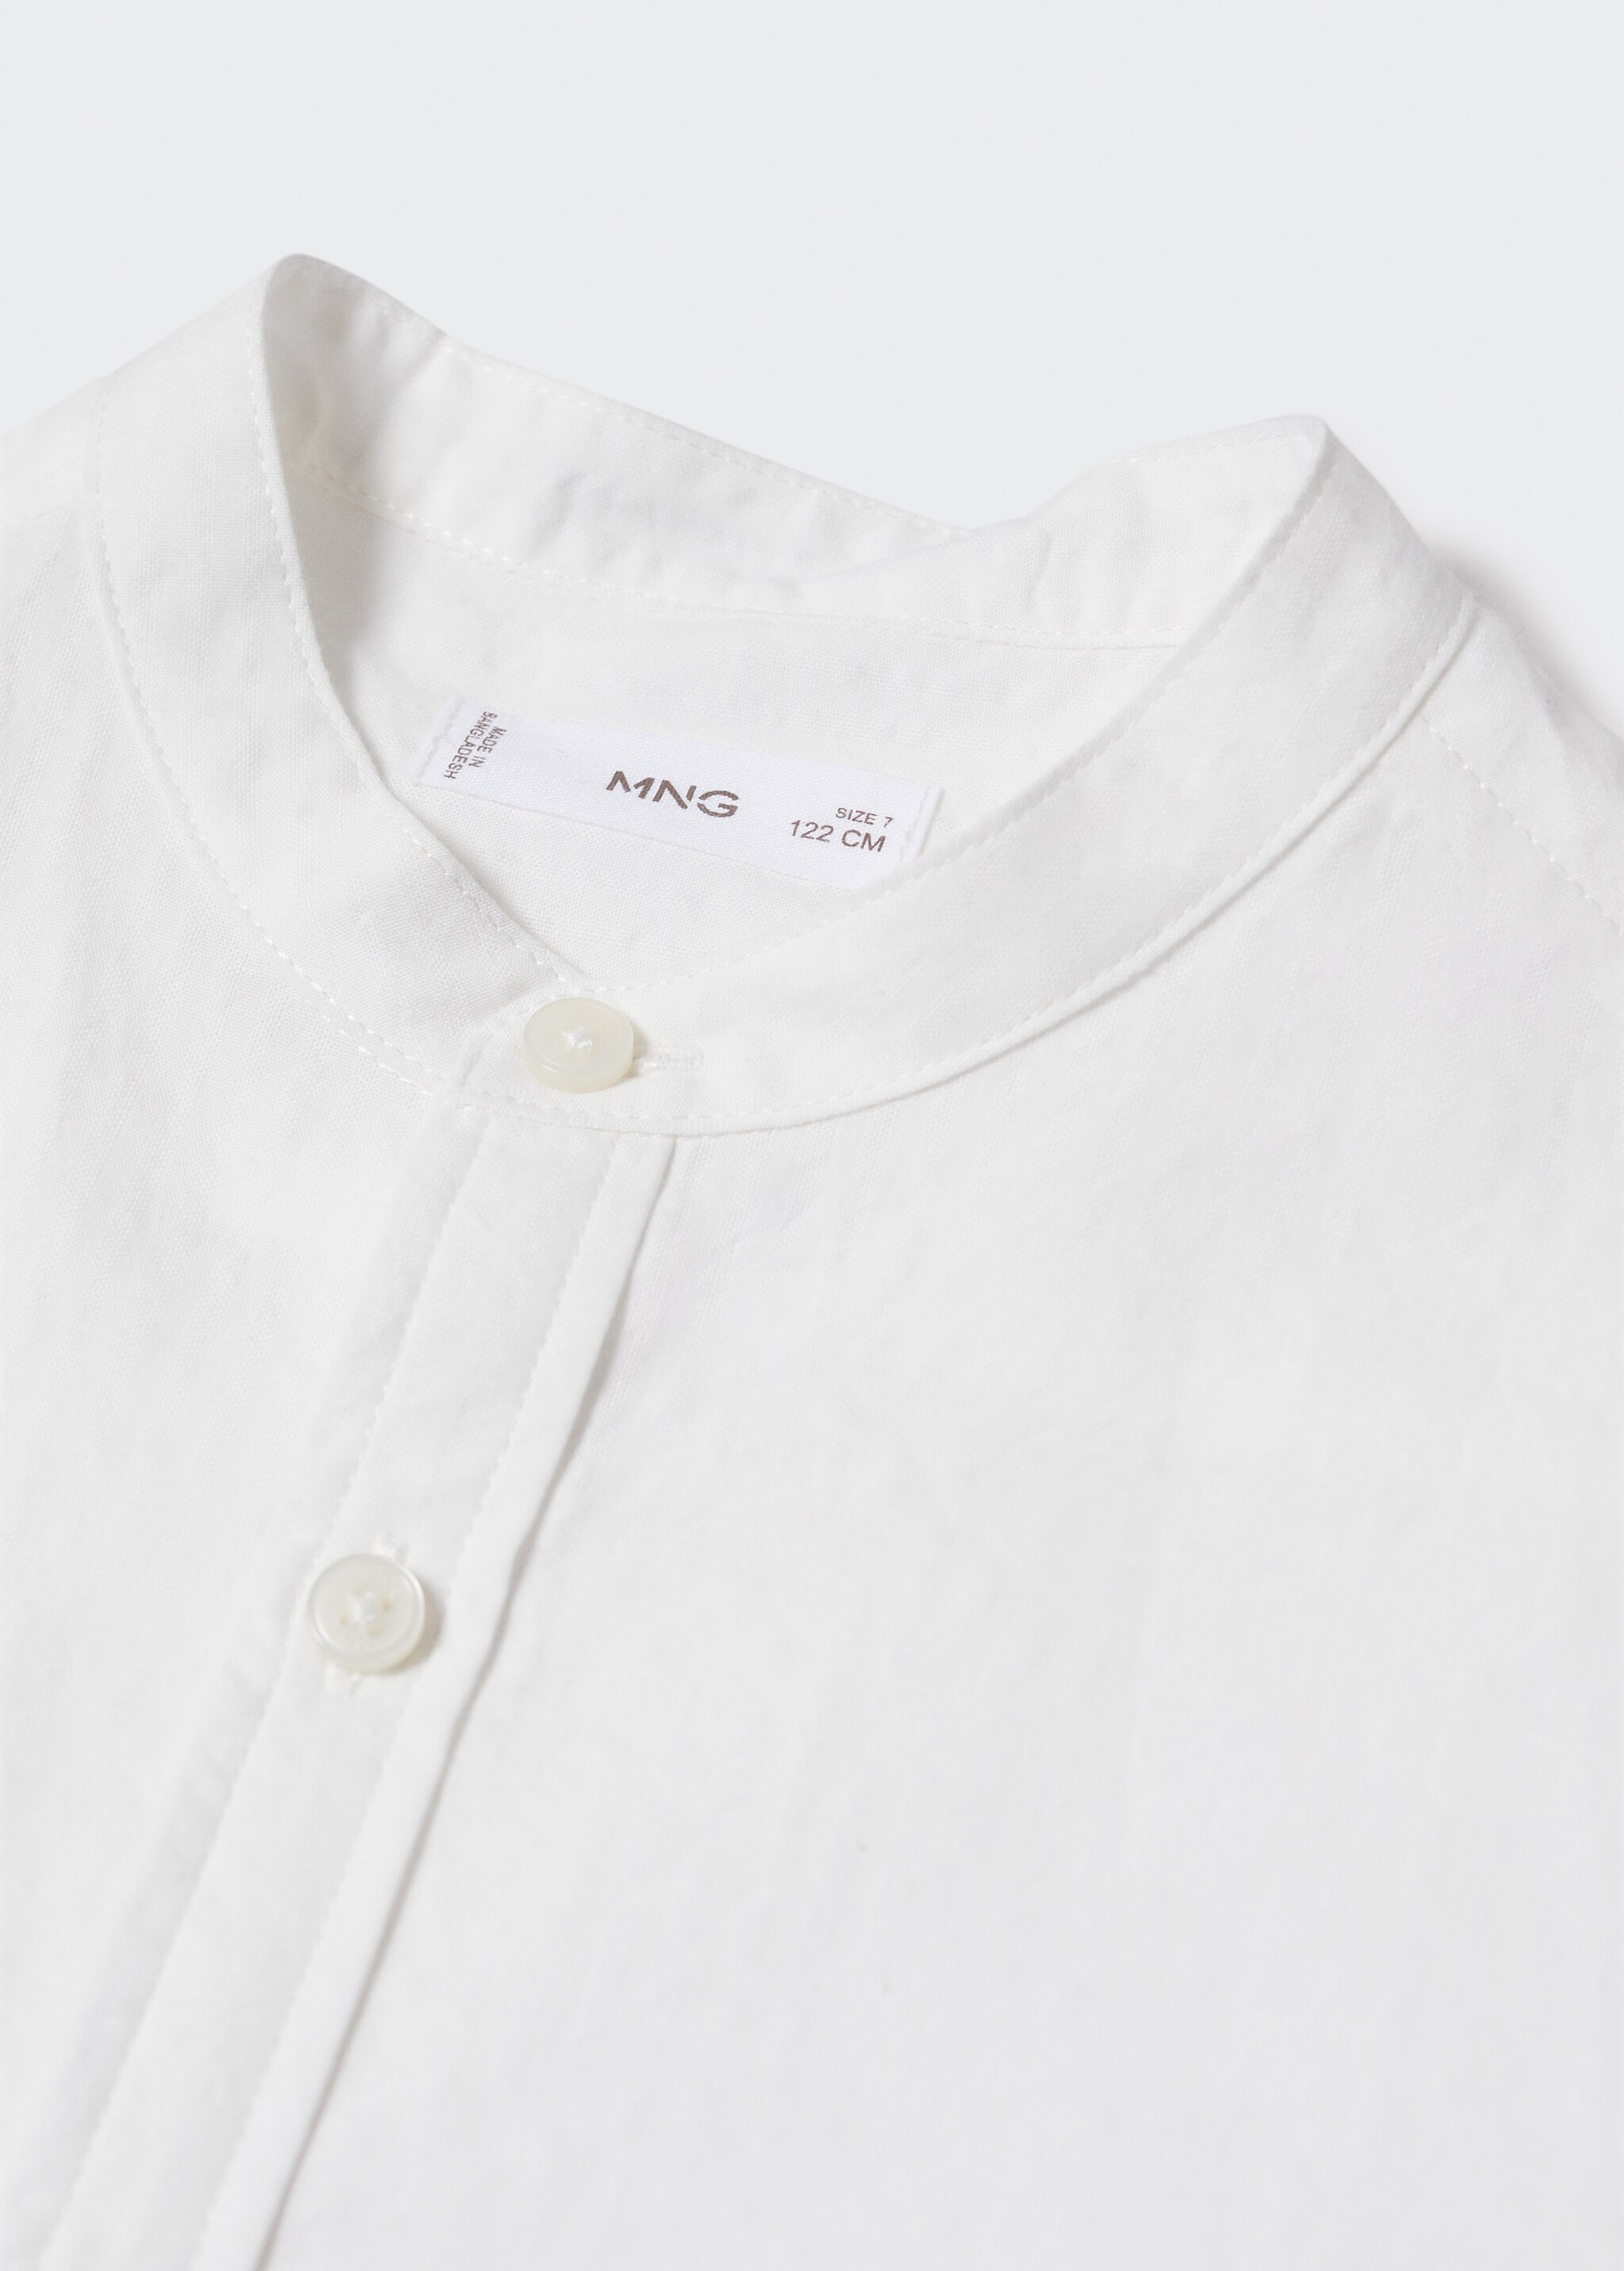 Mao collar shirt - Details of the article 8